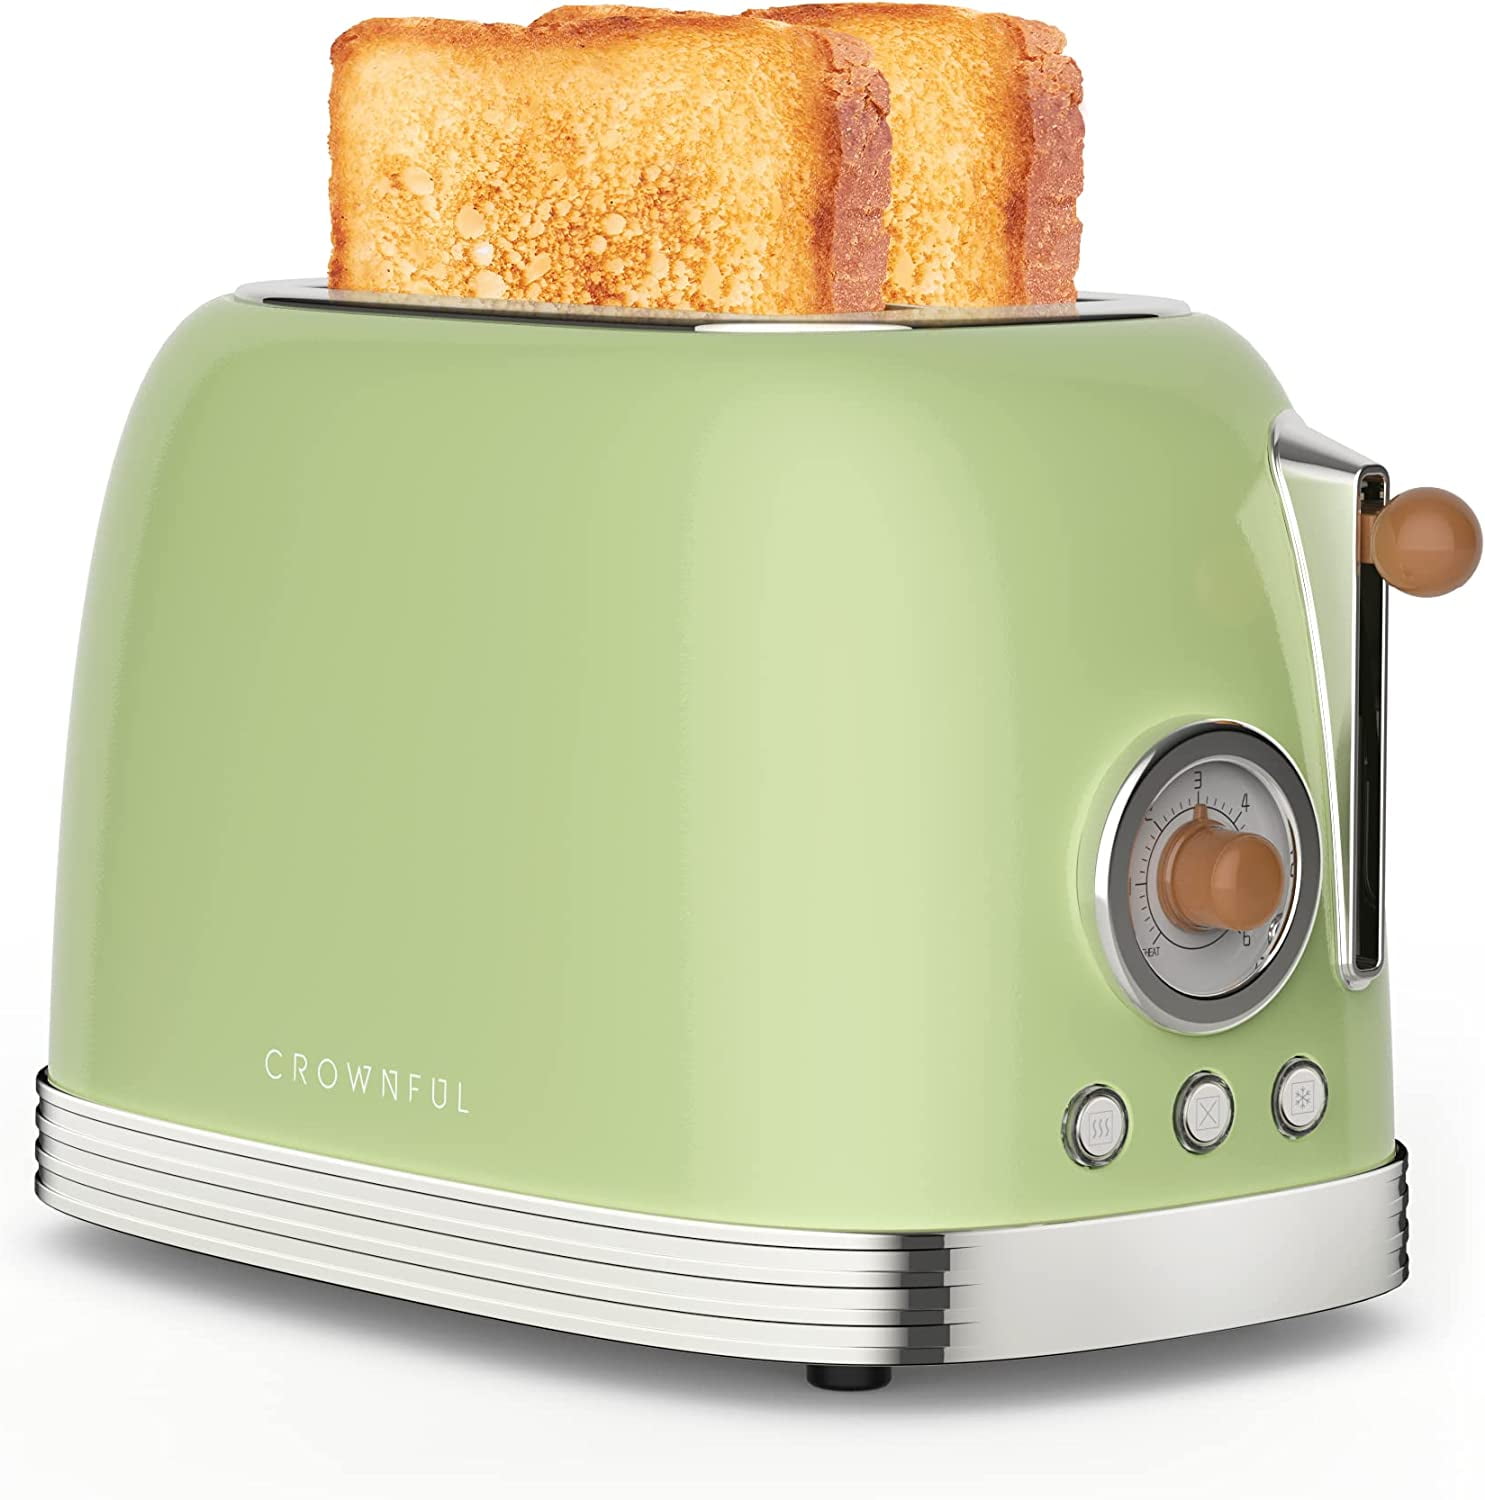 Ultrean Toaster 2 Slice with Extra-Wide Slot, Retro Stainless Steel Toaster with Removable Crumb Tray, Small Toaster with 6 Brow